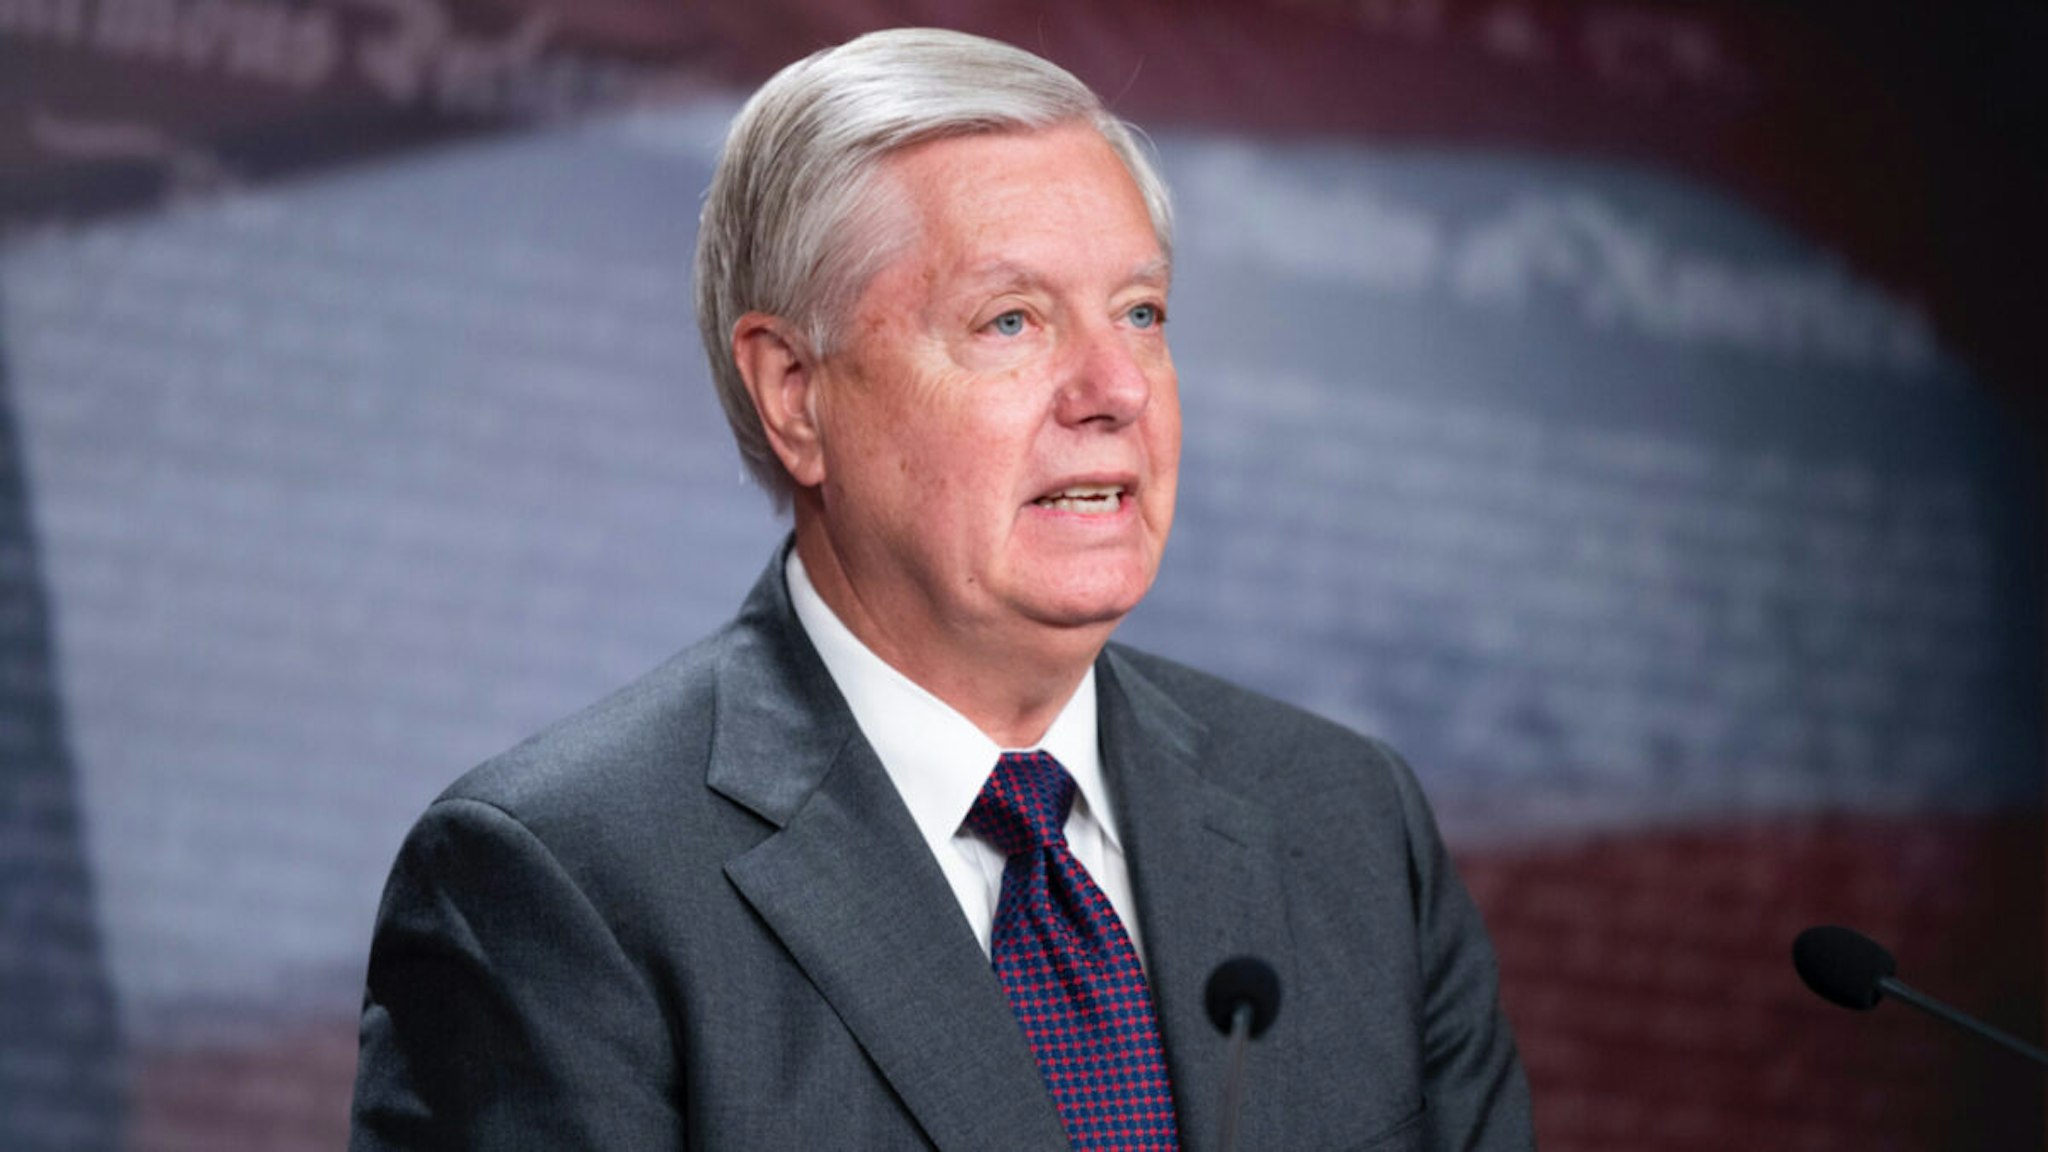 Sen. Lindsey Graham, R-S.C., holds a news conference in the Capitol on Thursday, Nov. 4, 2021.